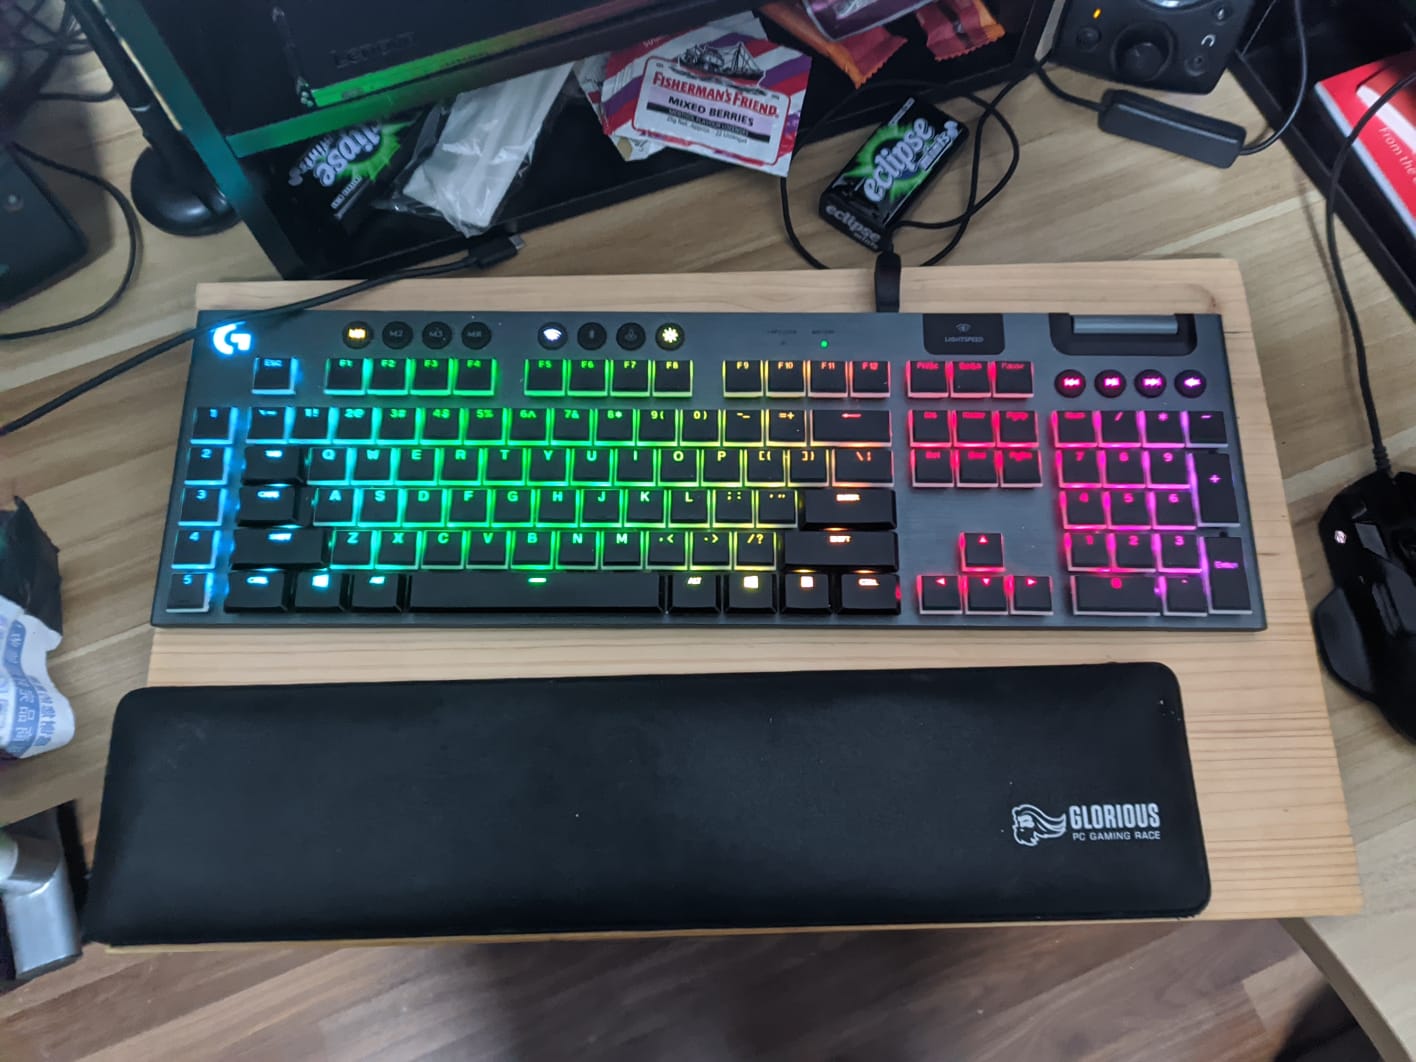 Porto væske Brig Quick how to I wrote to get fully backlit secondary key symbols for the  Logitech G-815 and G-915. - Peripherals - Linus Tech Tips